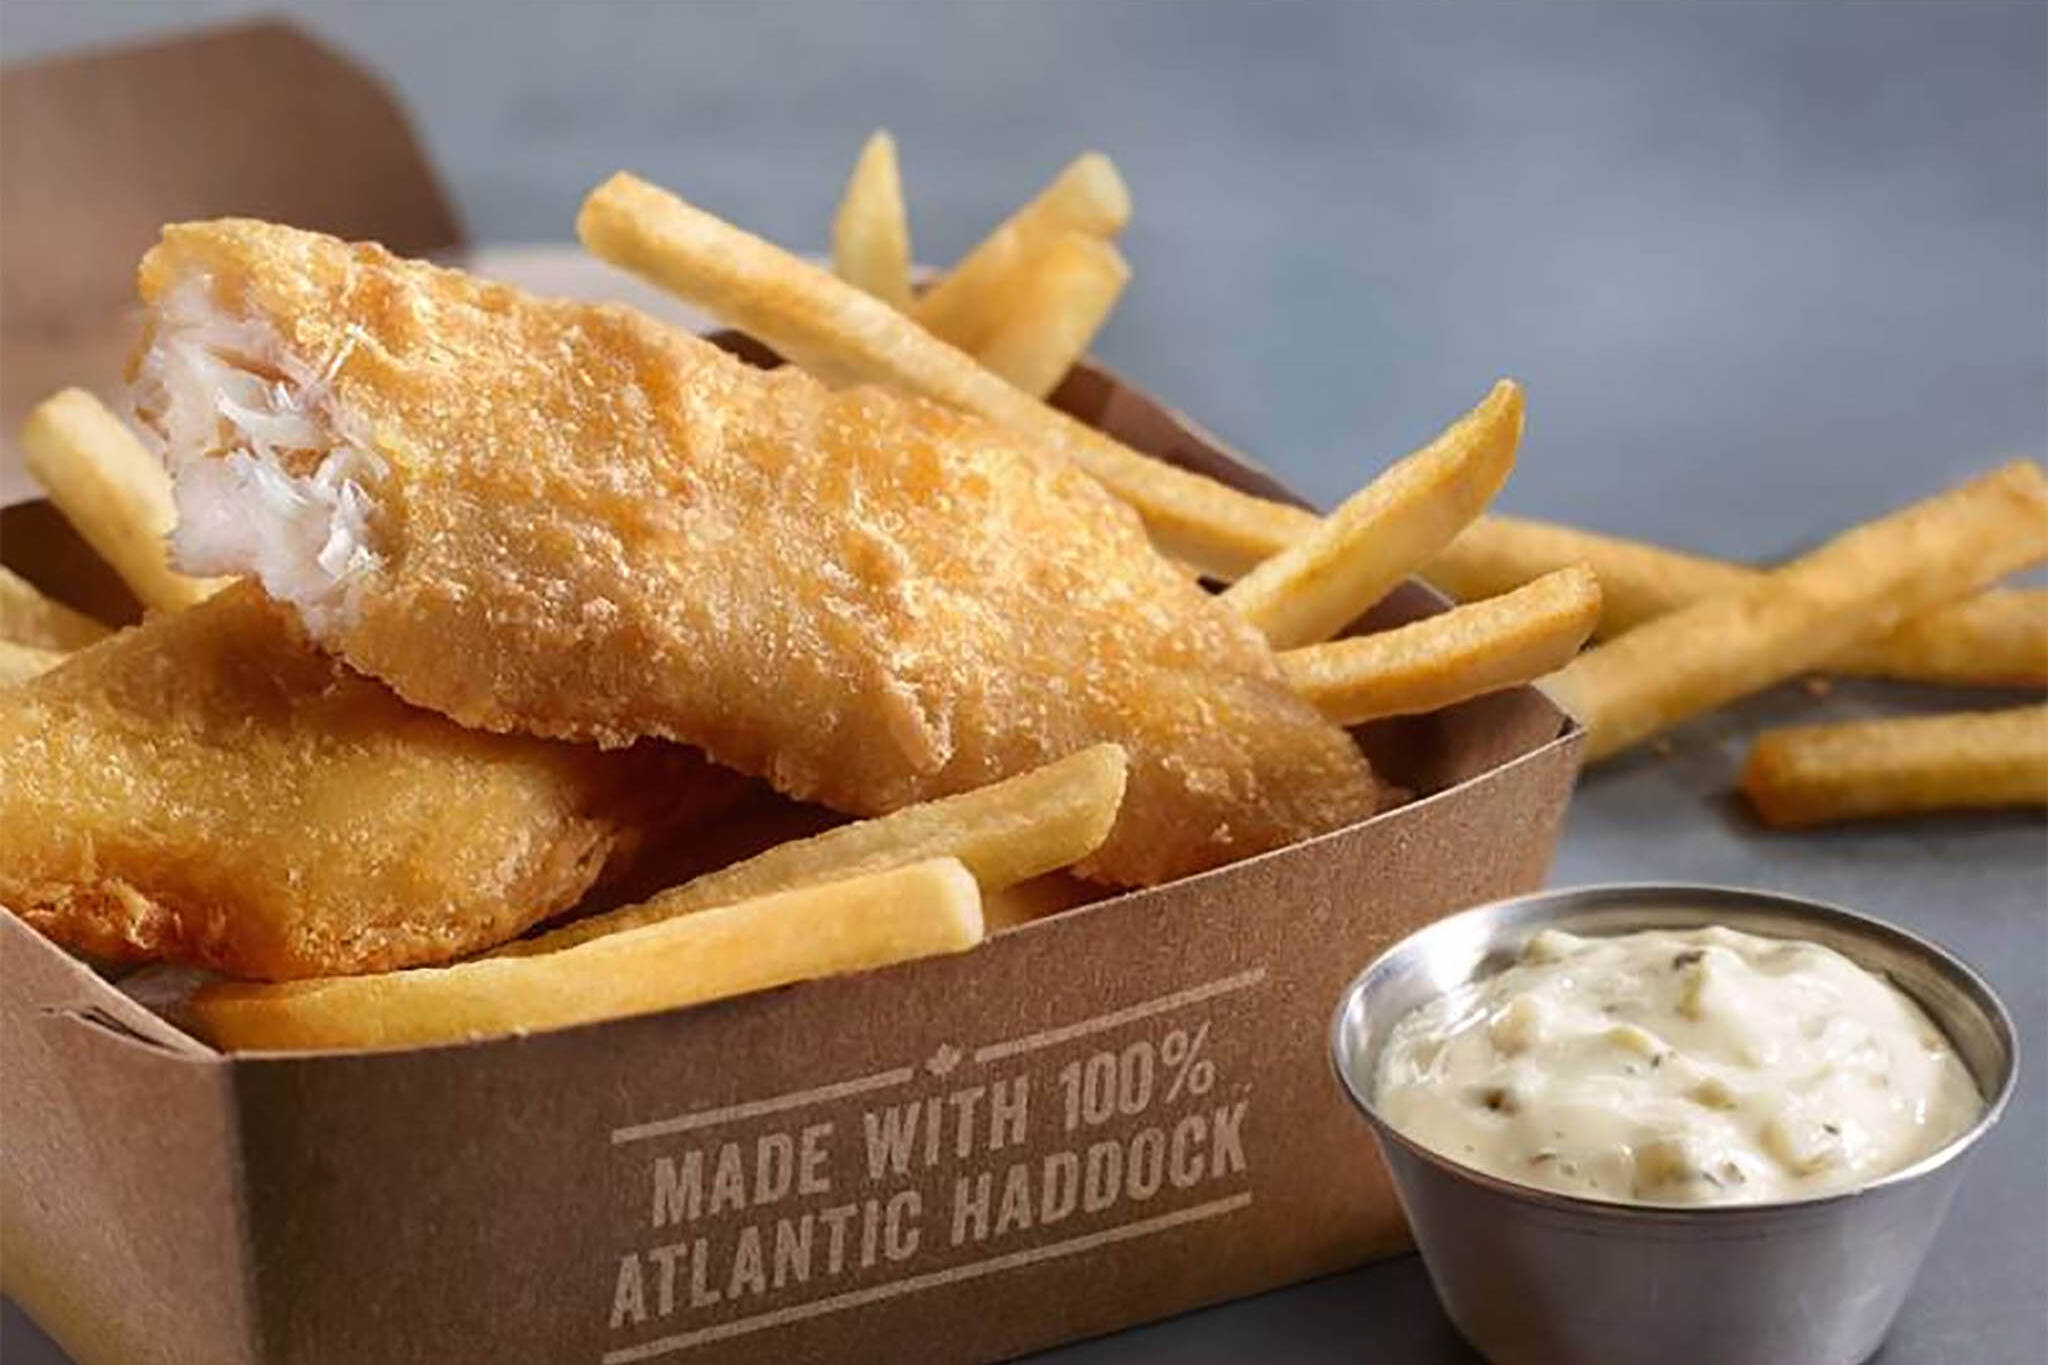 McDonald's is launching fish and chips in Toronto